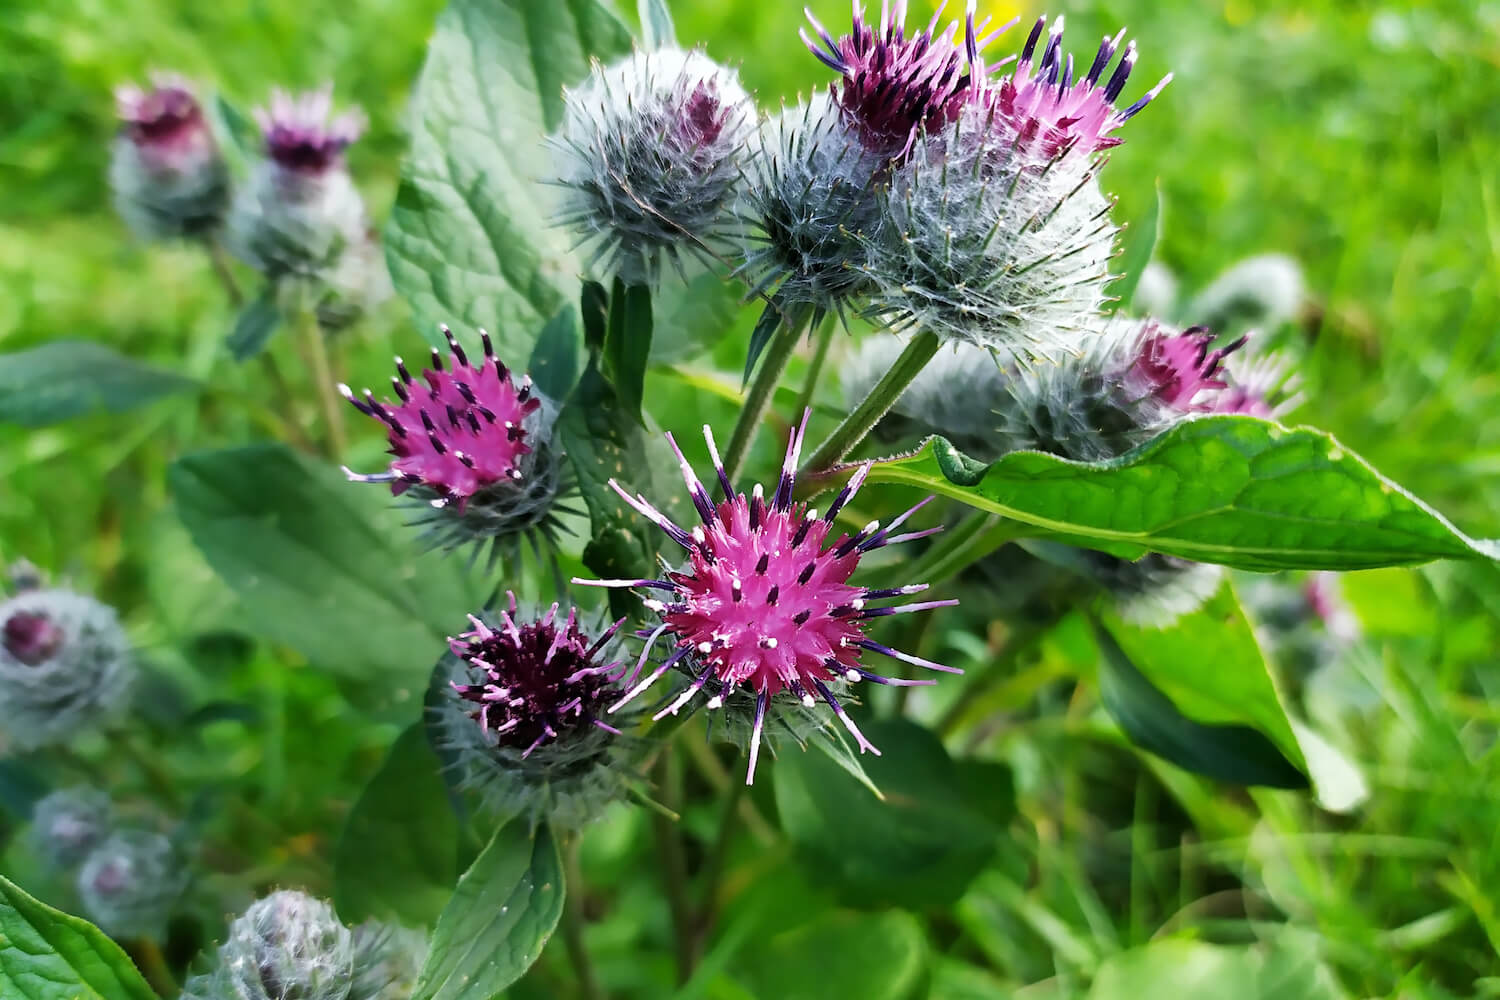 Image of Burdock leaves and flowers